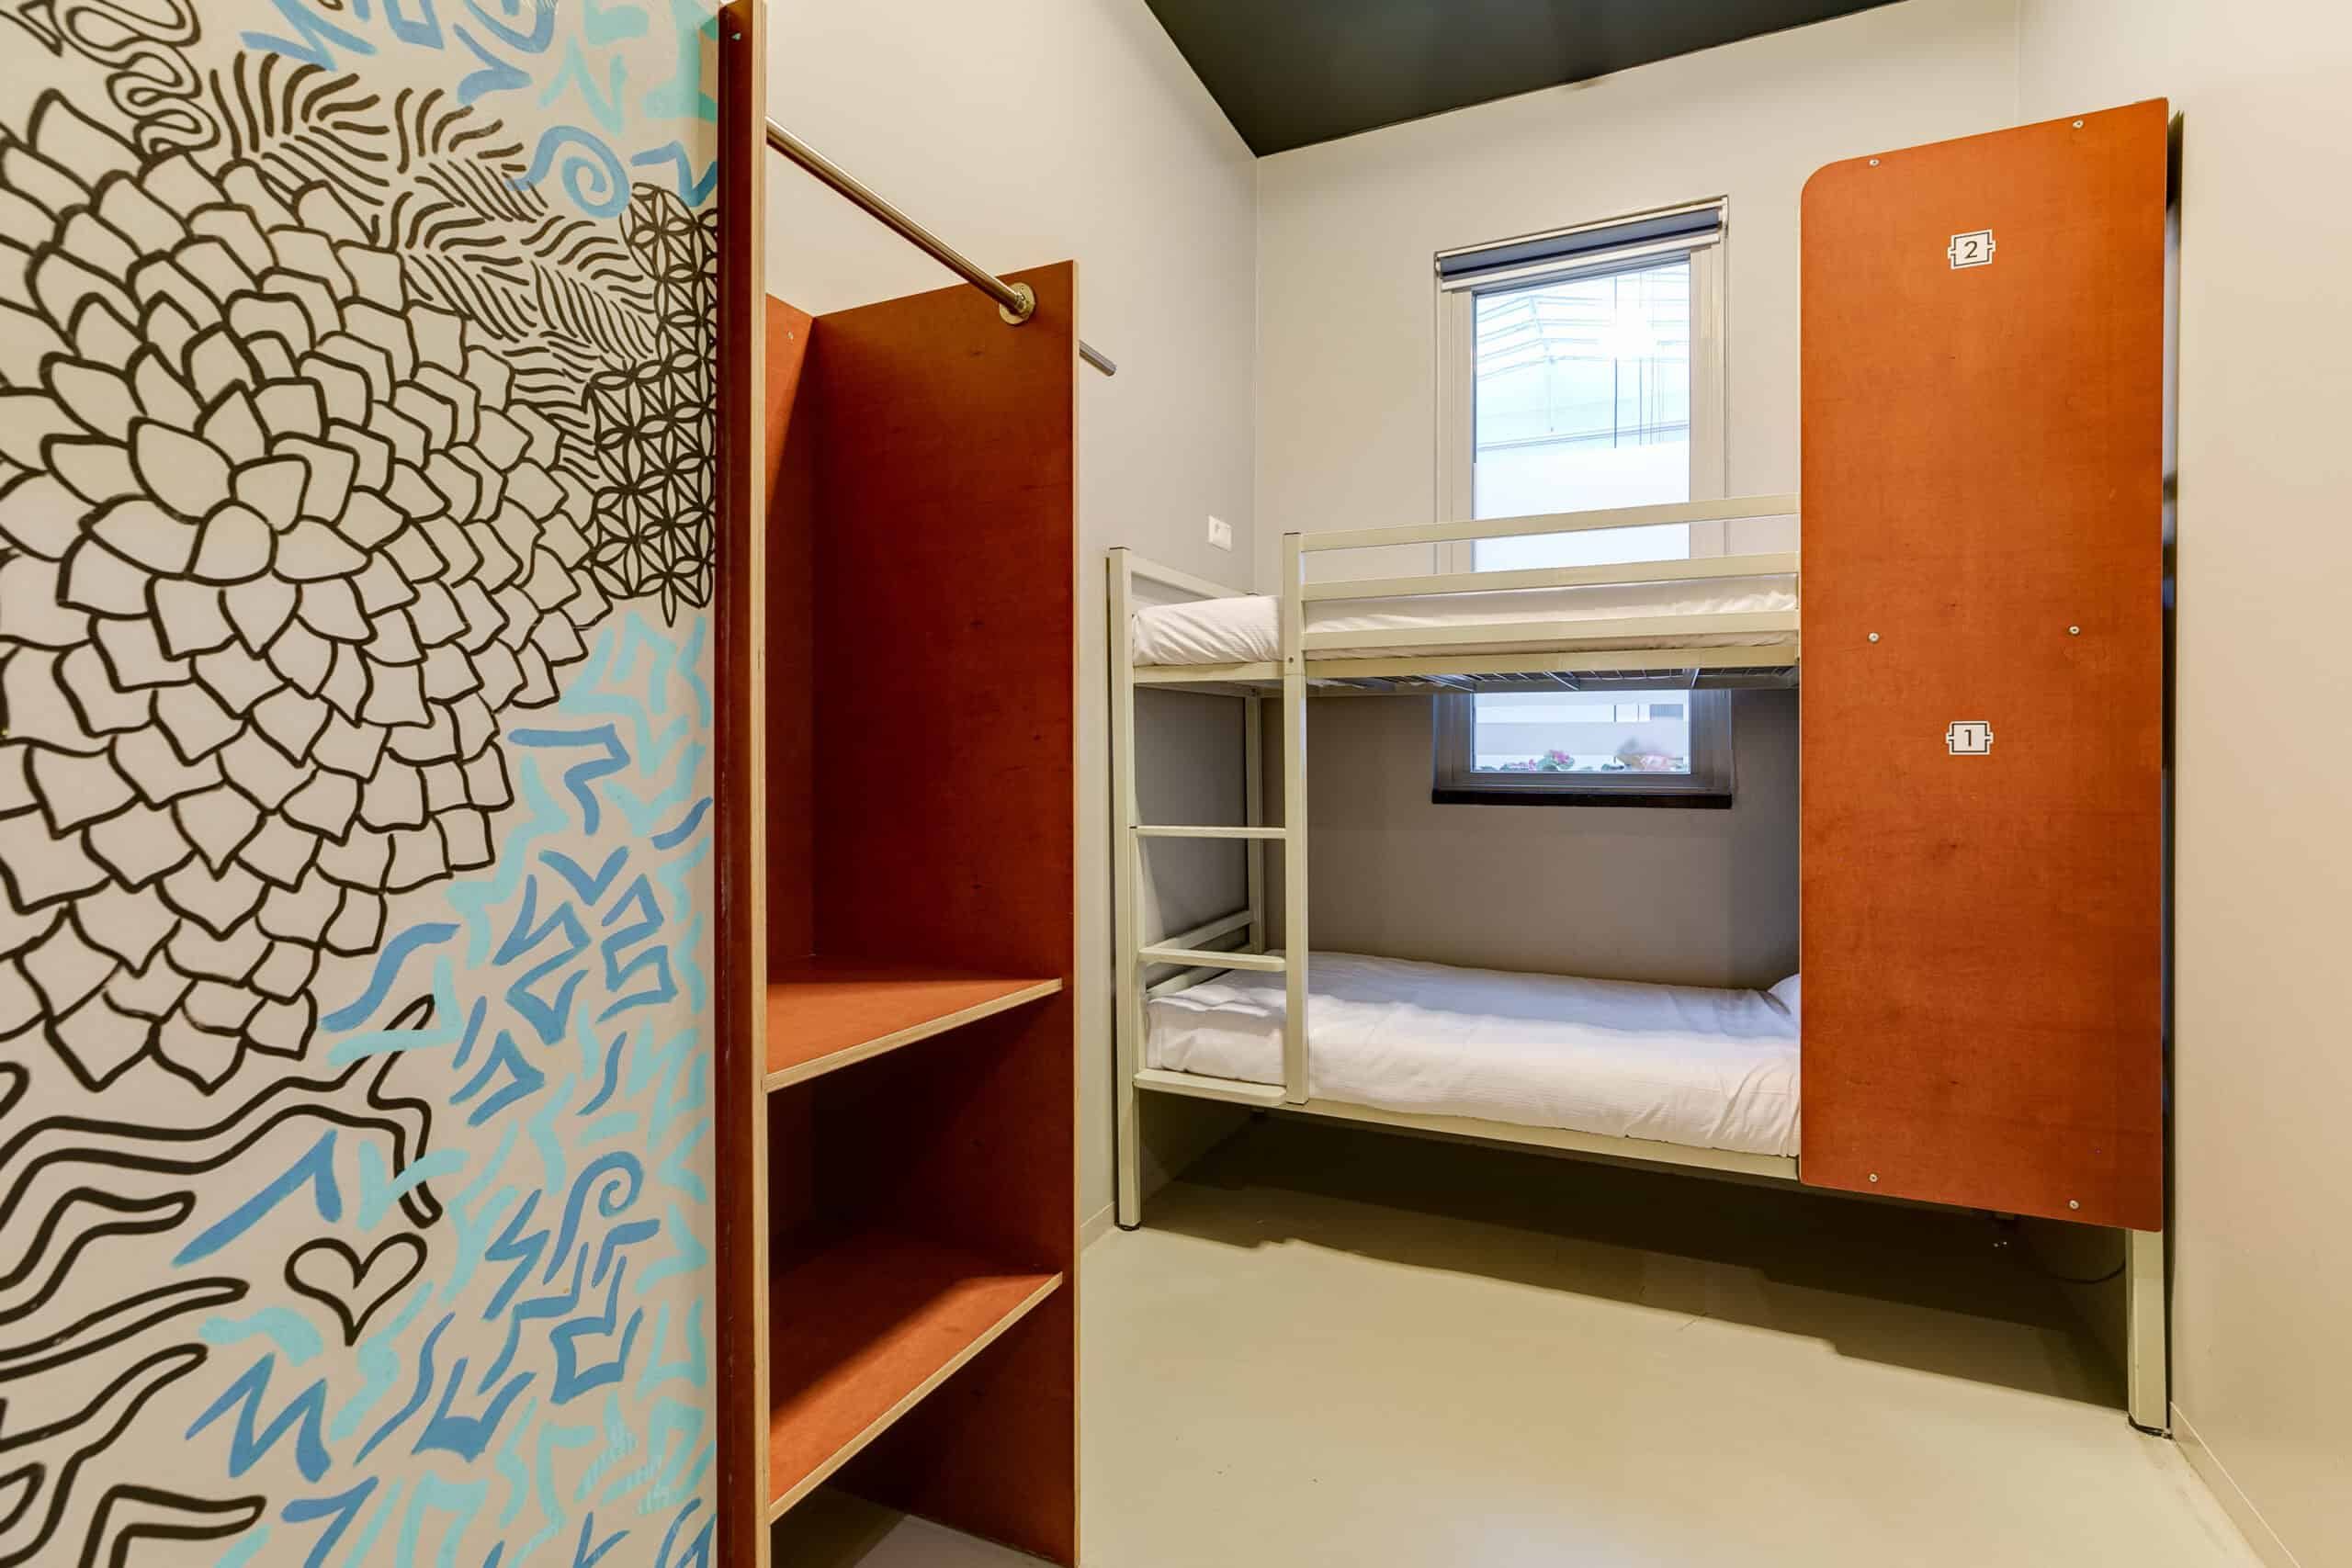 Private room with bunk beds at Clinknoord hostel Amsterdam